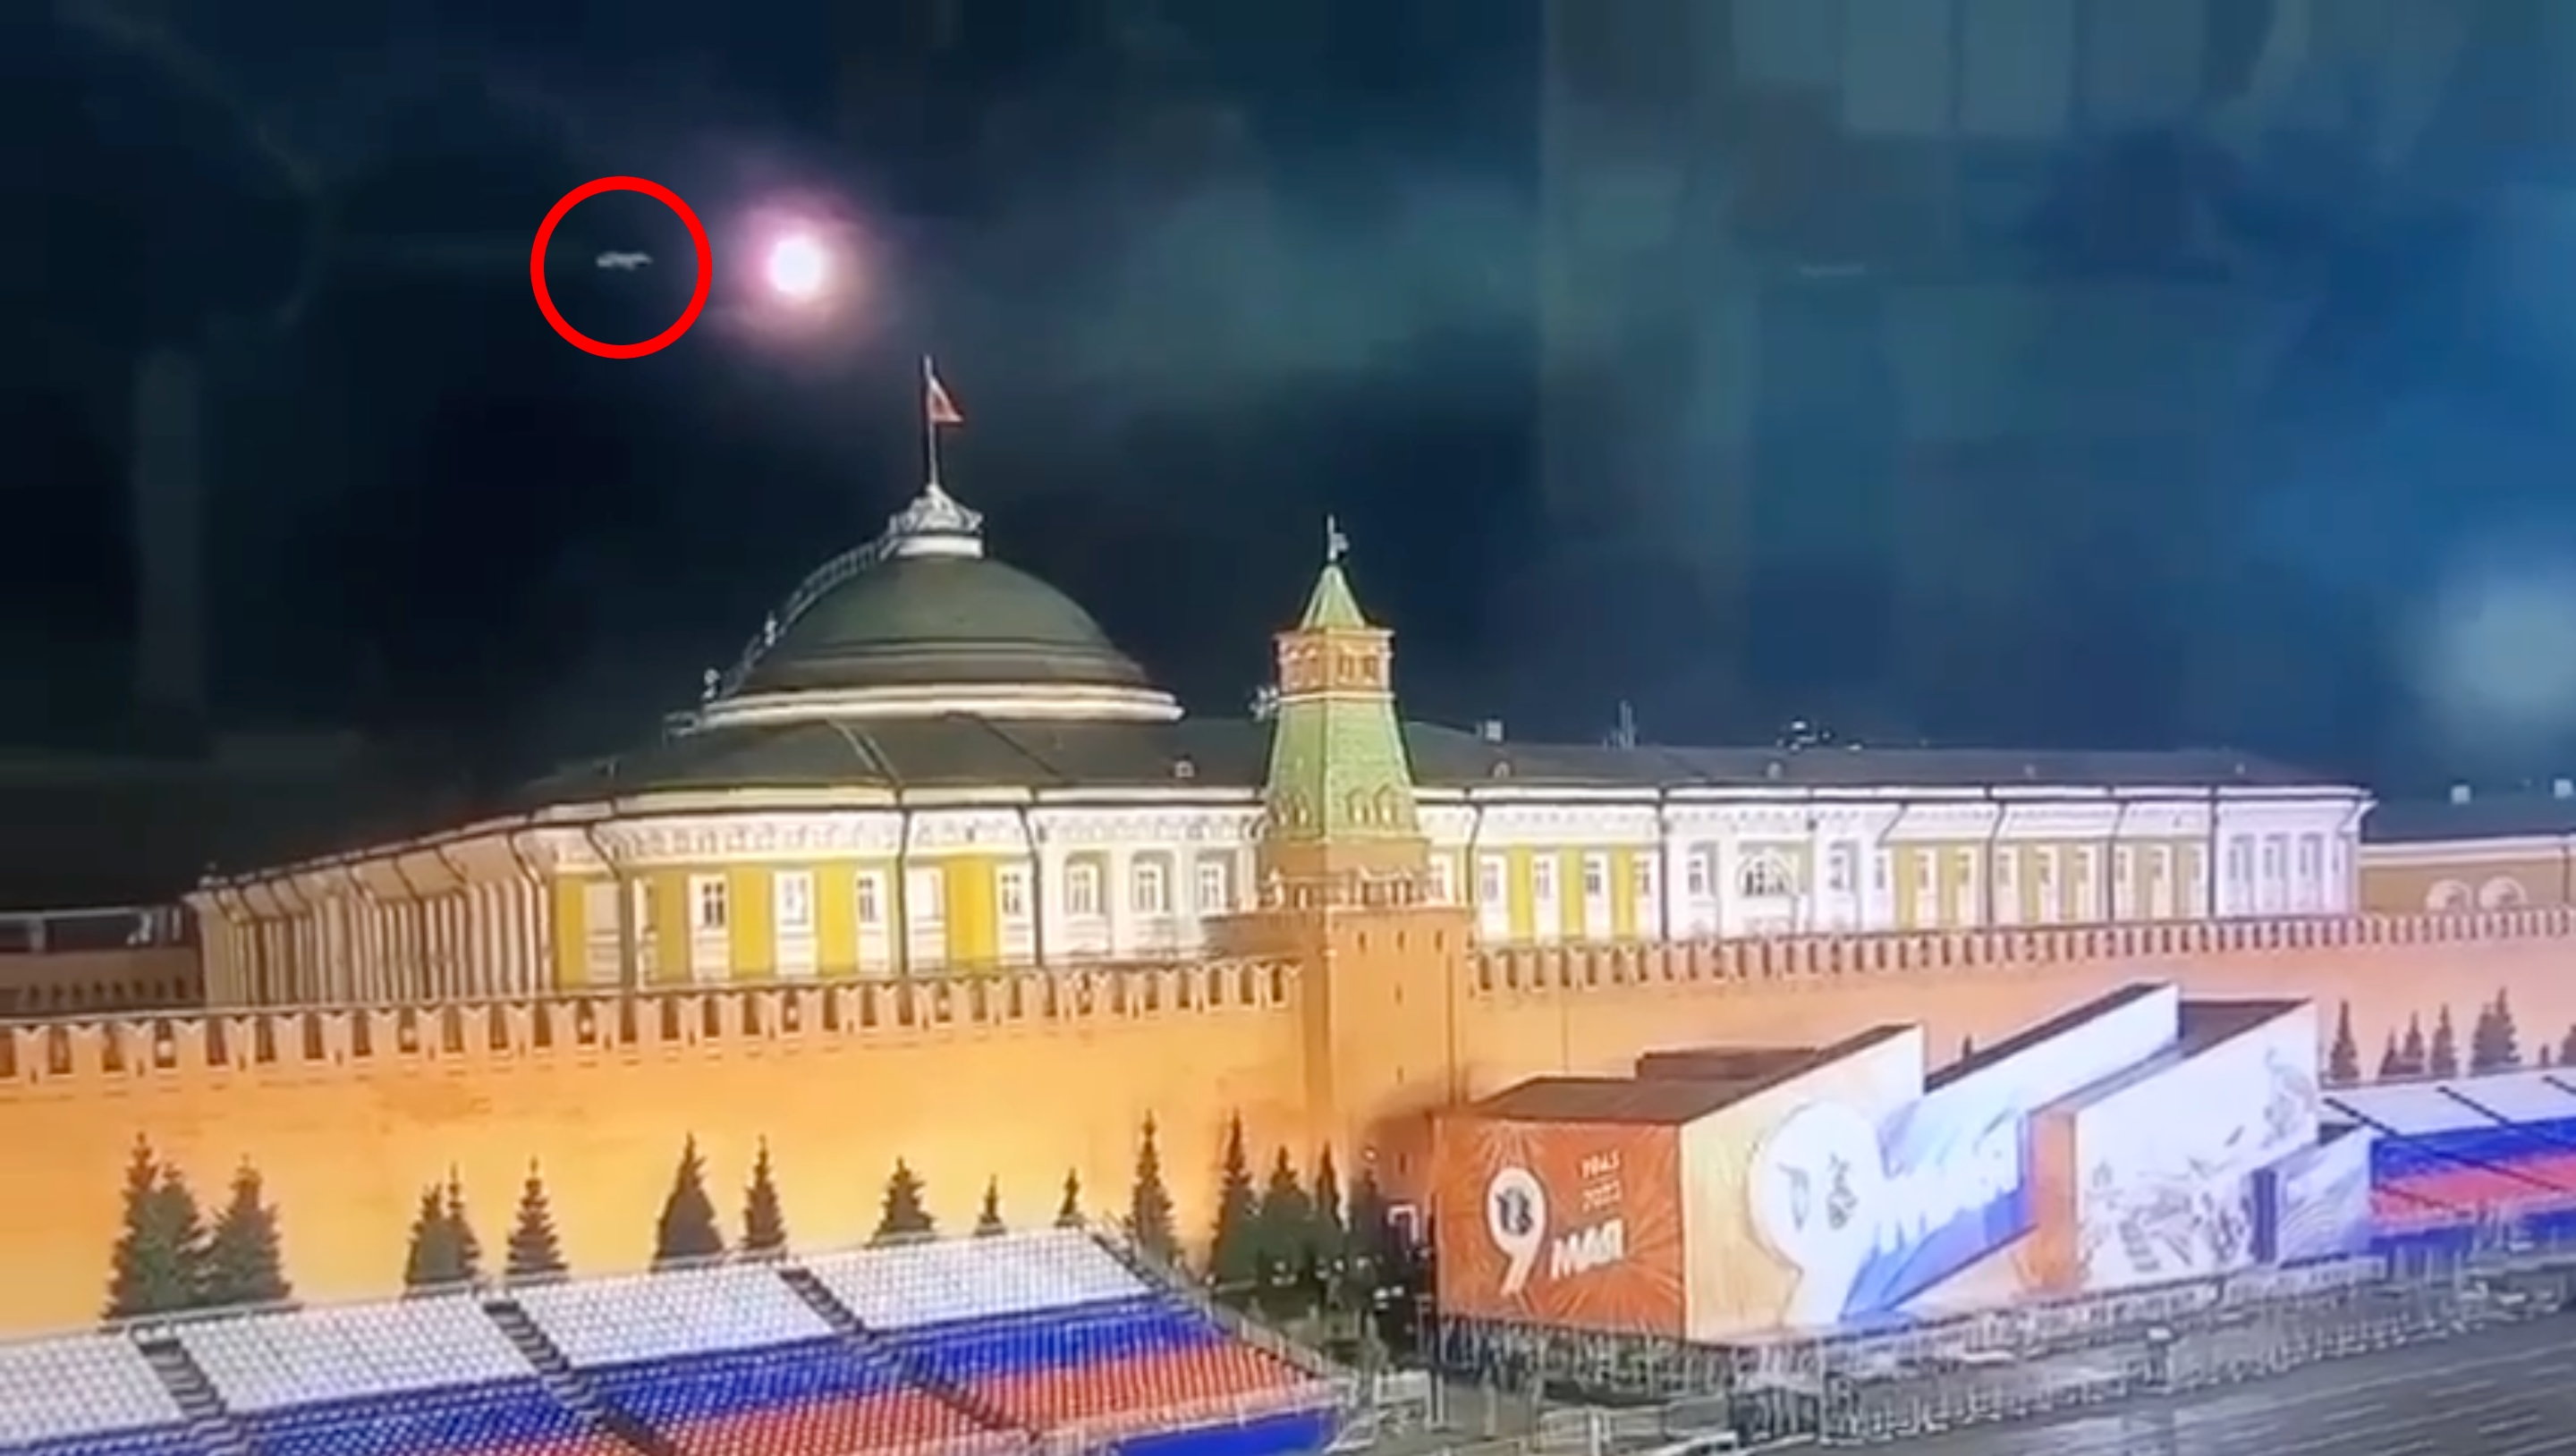 Unknown drones attacked Putin's residence in the Kremlin